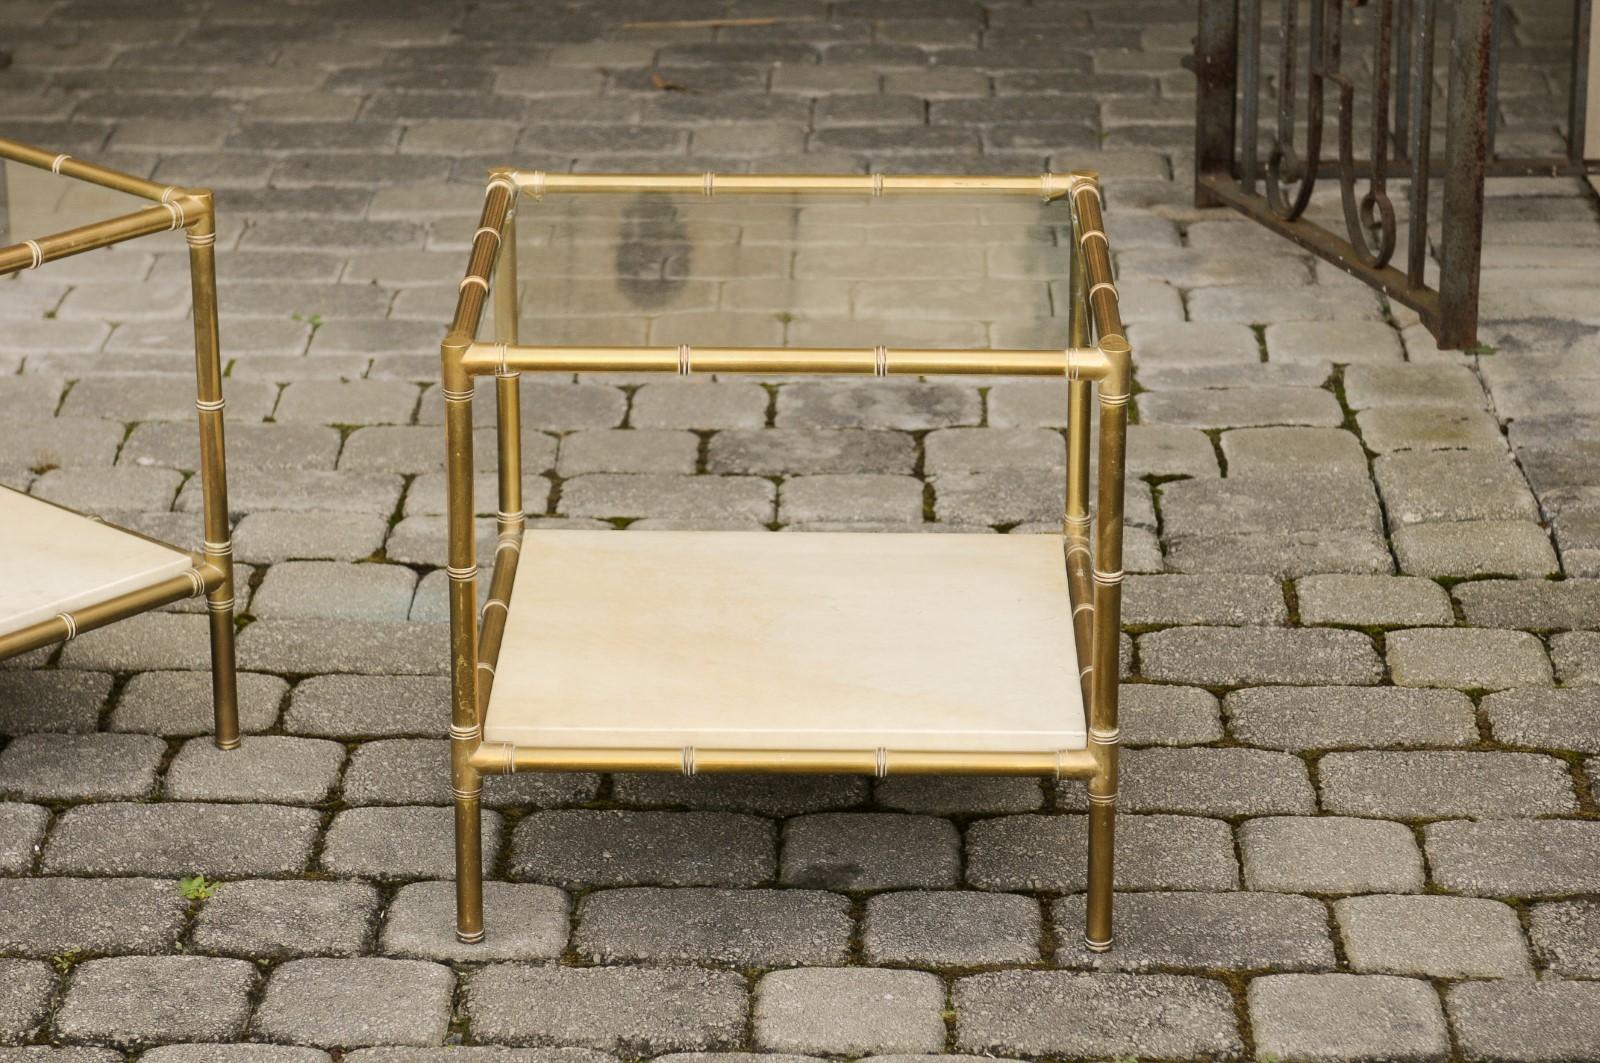 20th Century Pair of Italian Midcentury Brass Side Tables with Glass Top and Vellum Shelf